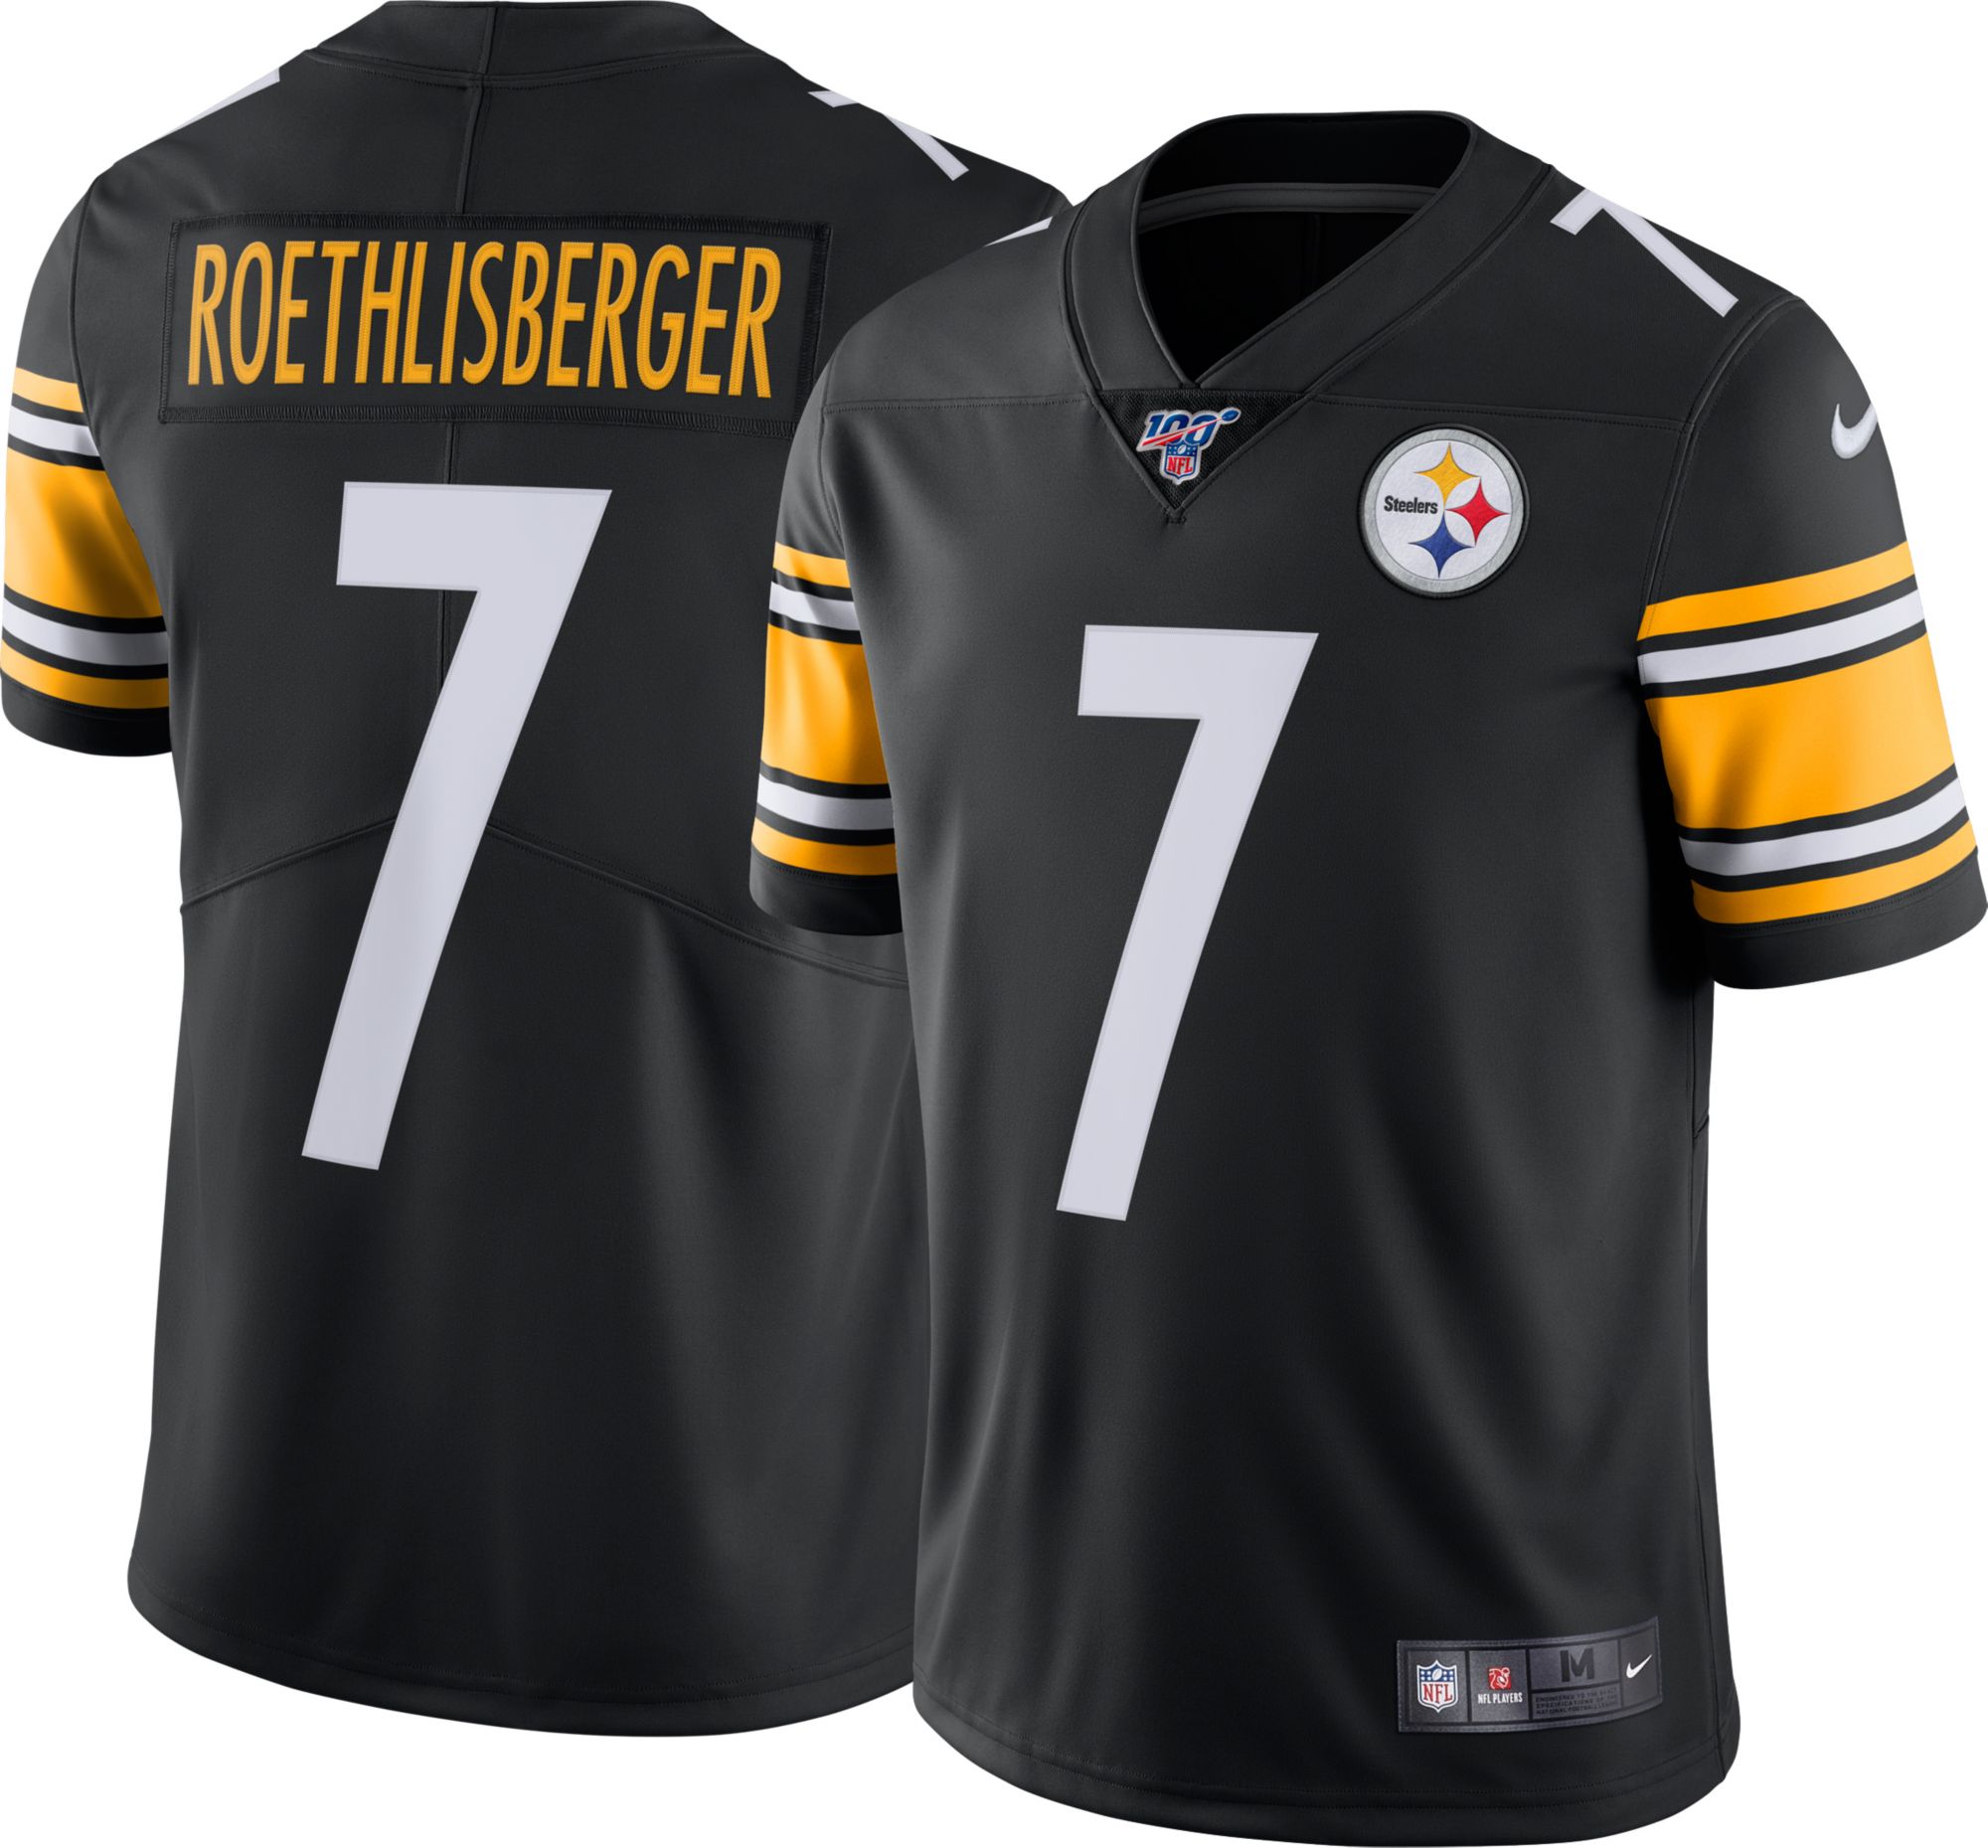 where can i buy a steelers jersey near me